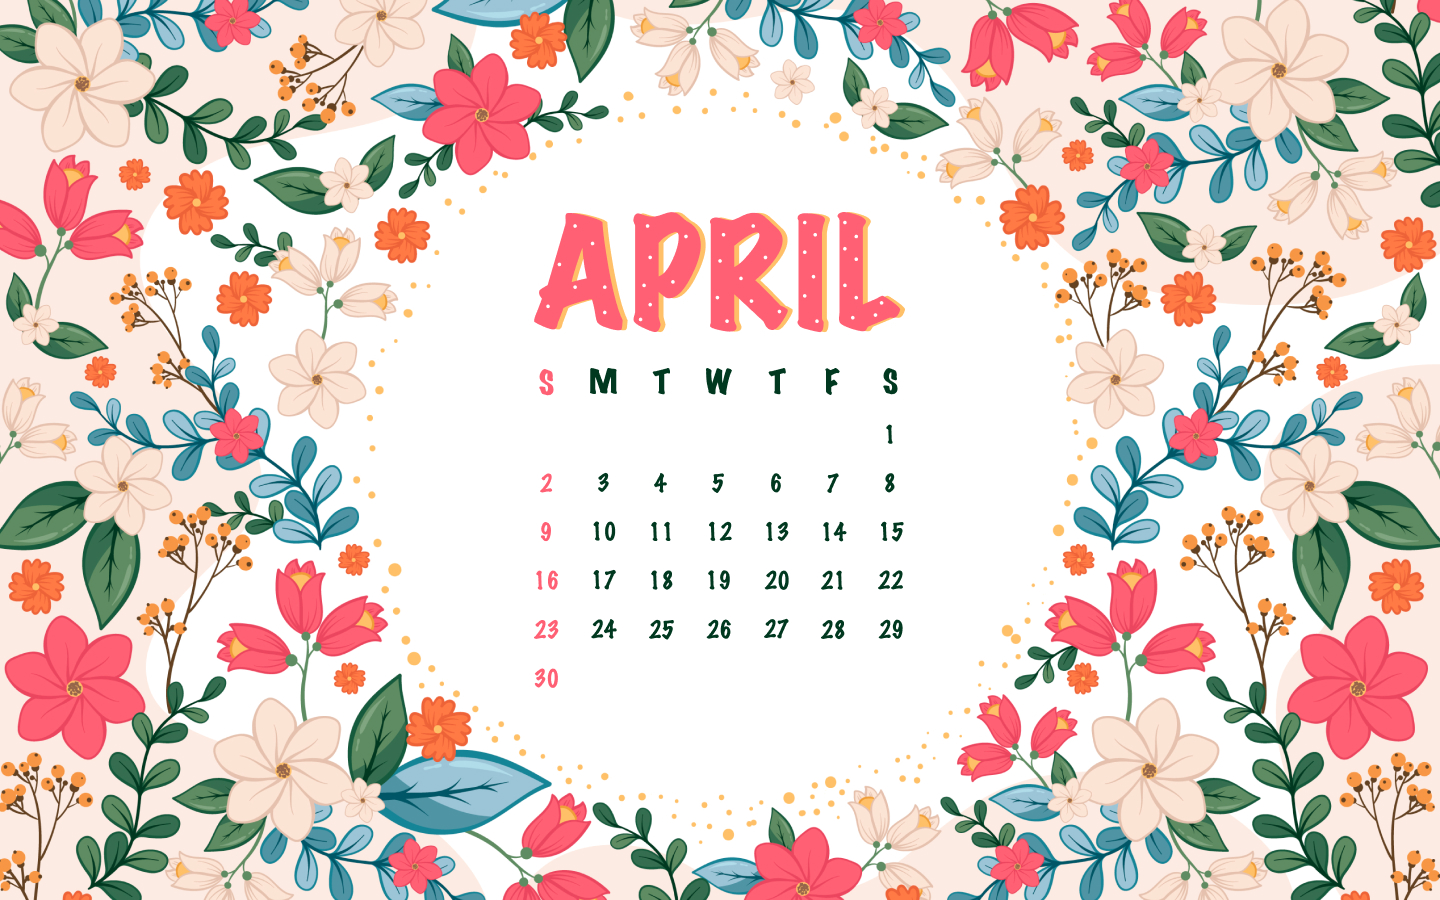 Calendar with a floral frame around it.